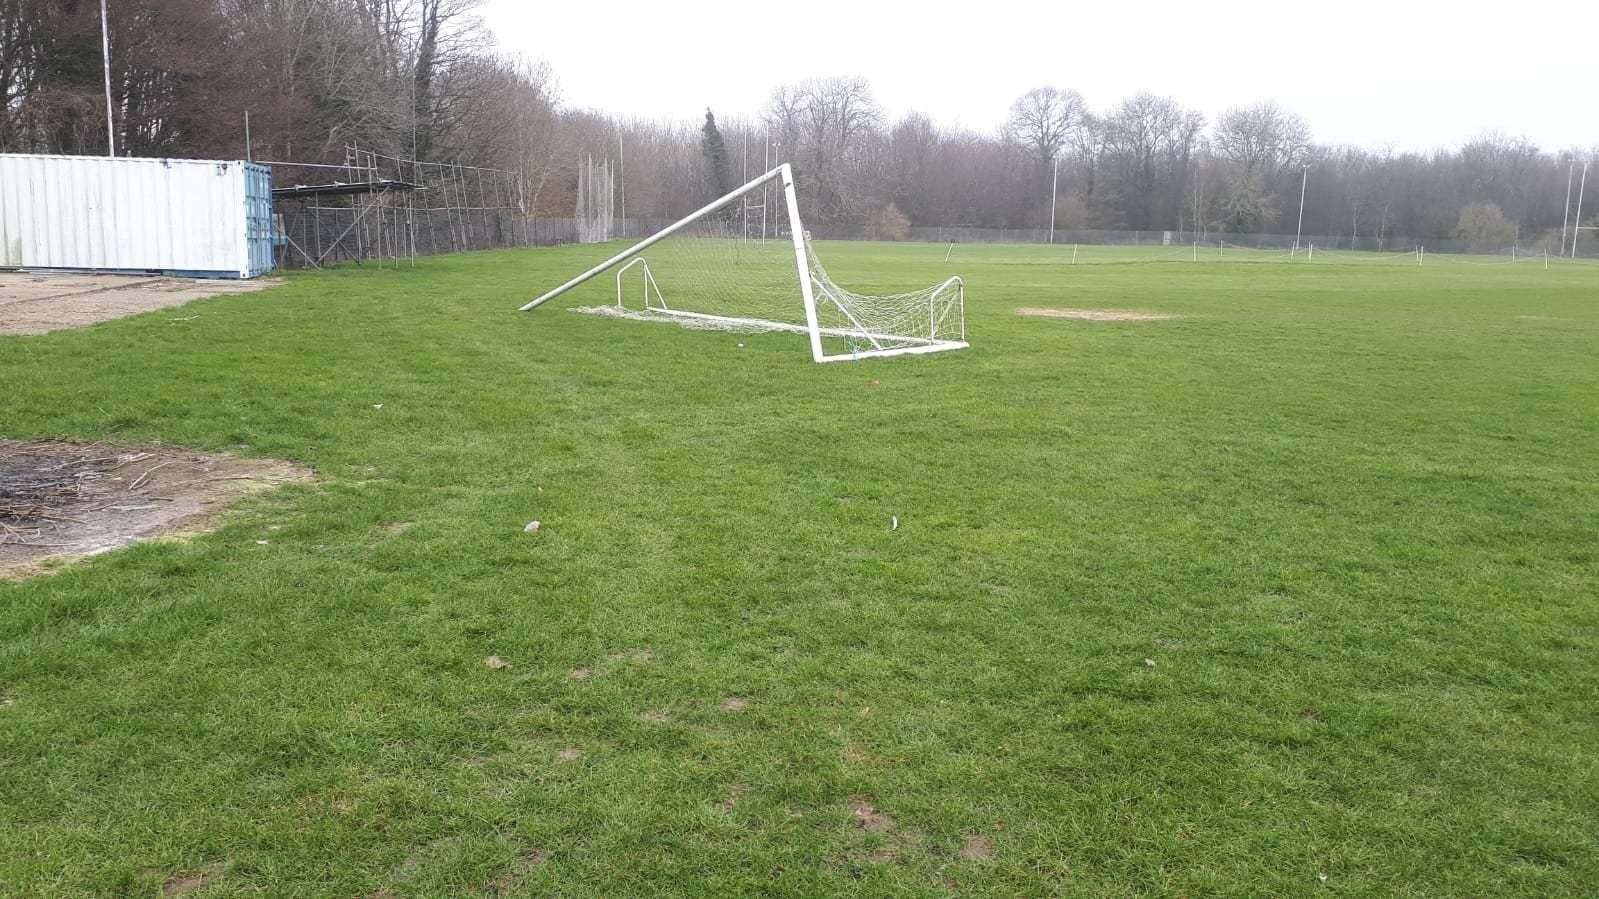 Damage done at Lordswood Football Club Picture: @LordswoodFC